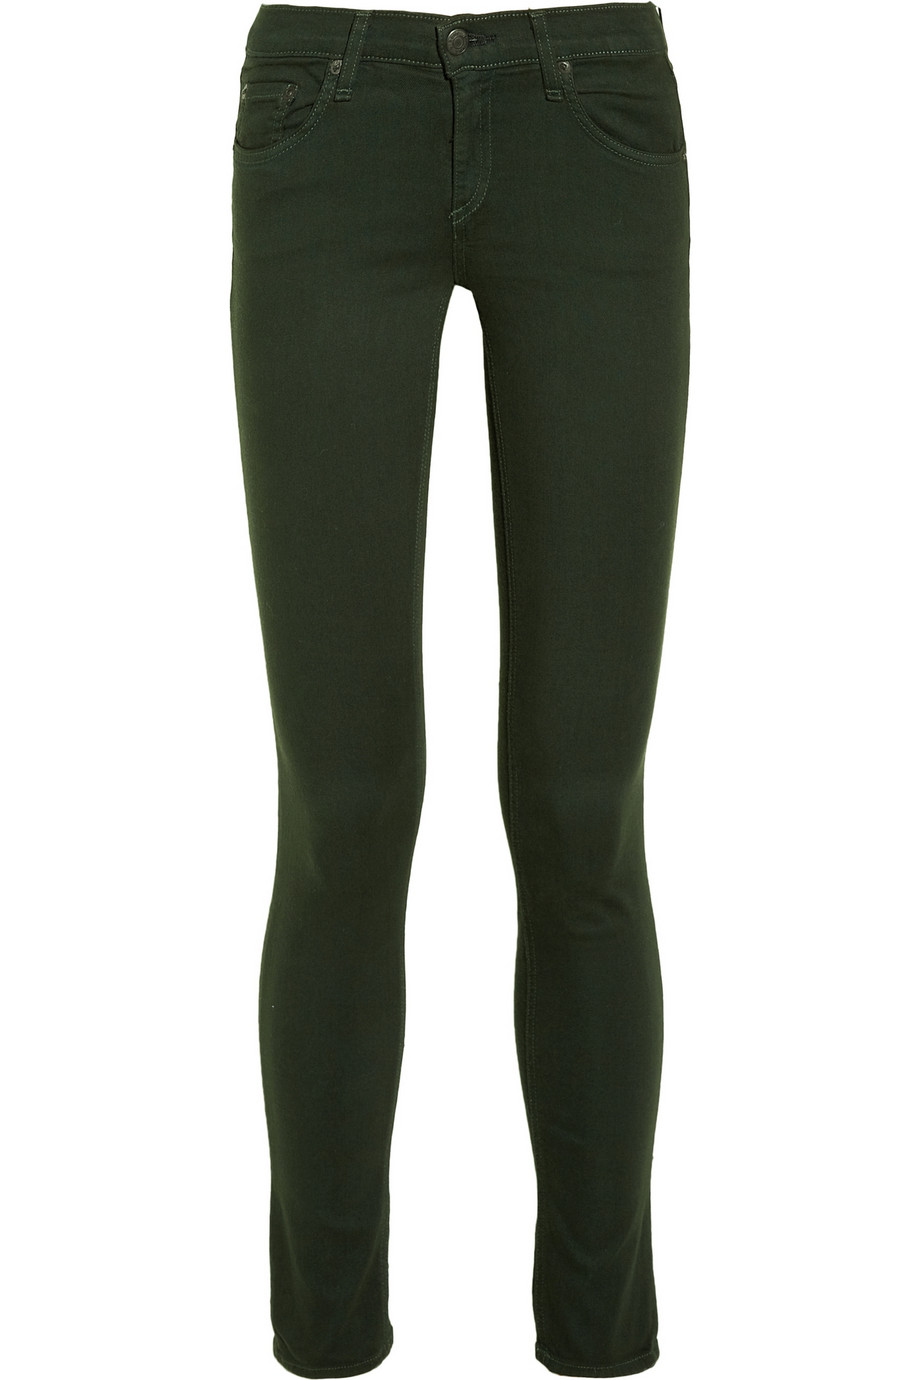 Rag & Bone The Skinny Mid-rise Twill Jeans in Forest (Green) - Lyst